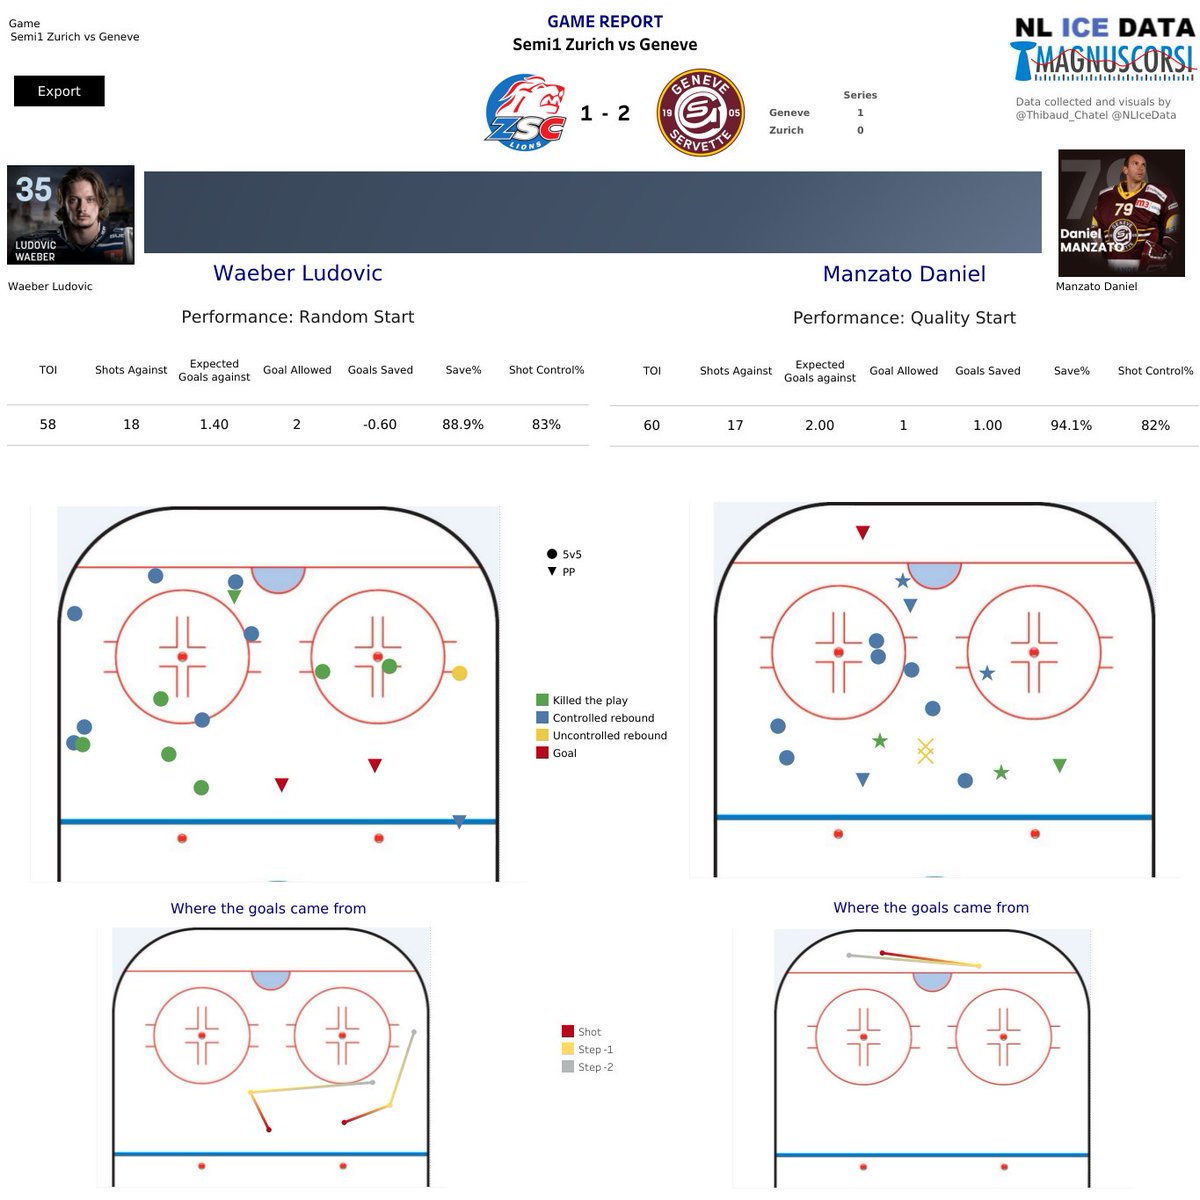  Goaltender ReportManzato was really solid , allowing 1 less goal than expected. Another sign of that low danger game, both goalies posted a Shot control% (putting the puck out of danger) above 80%. When the league average is at 66%. Both Geneva goals came with traffic